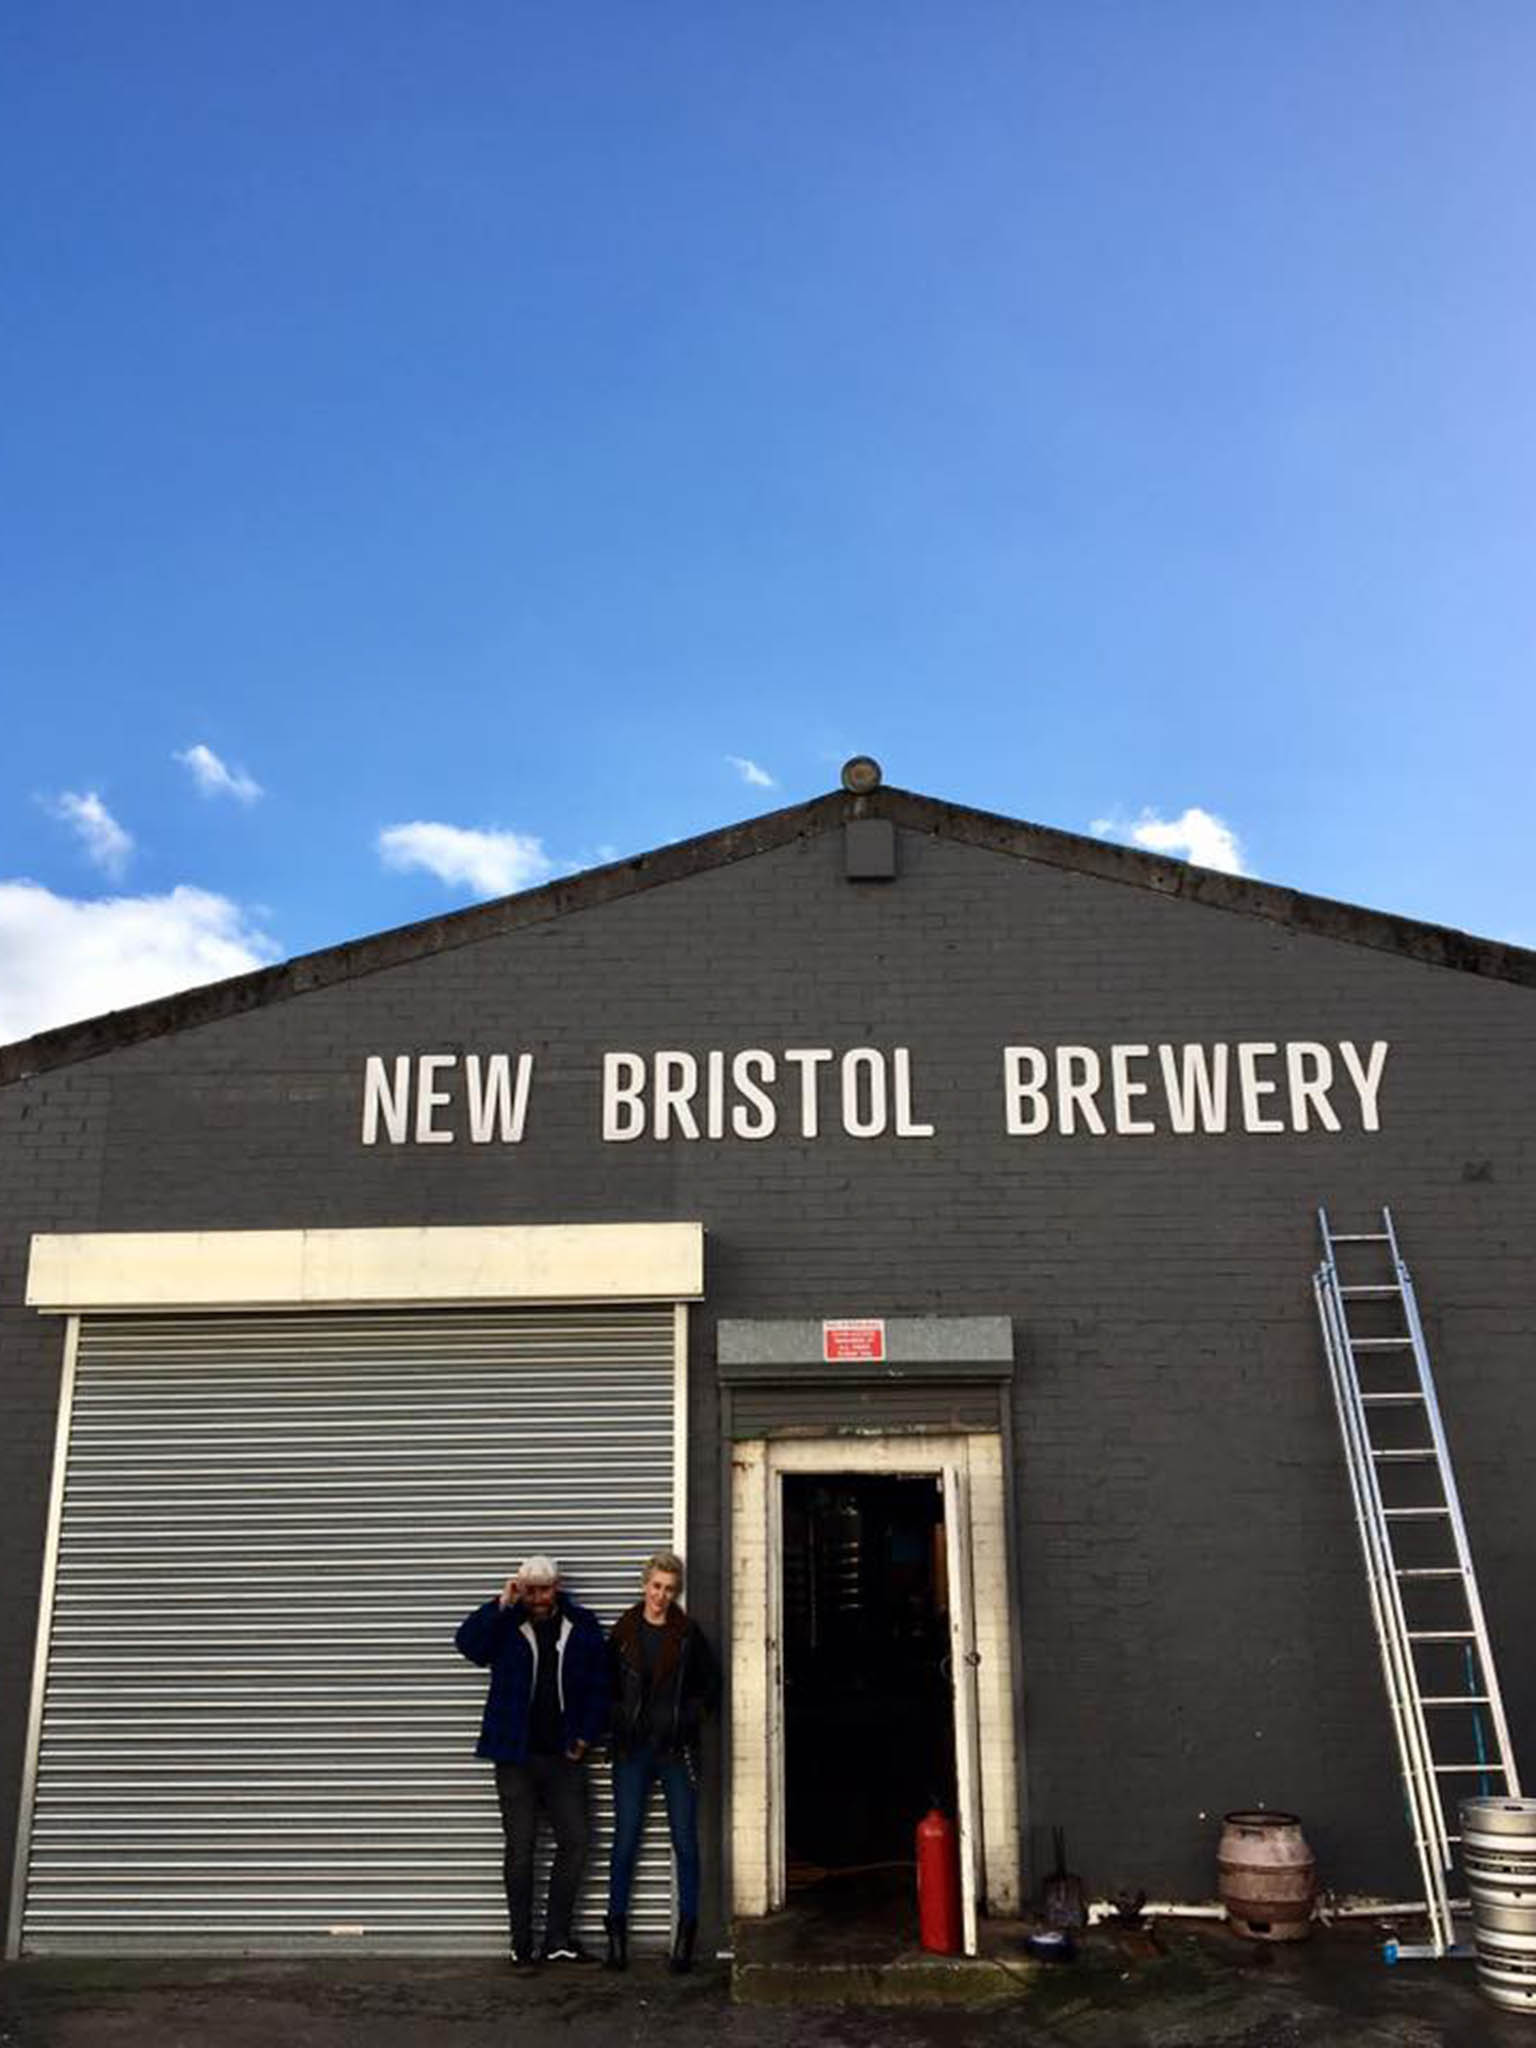 For James and Knowles, setting up a school inside the brewery was the obvious choice